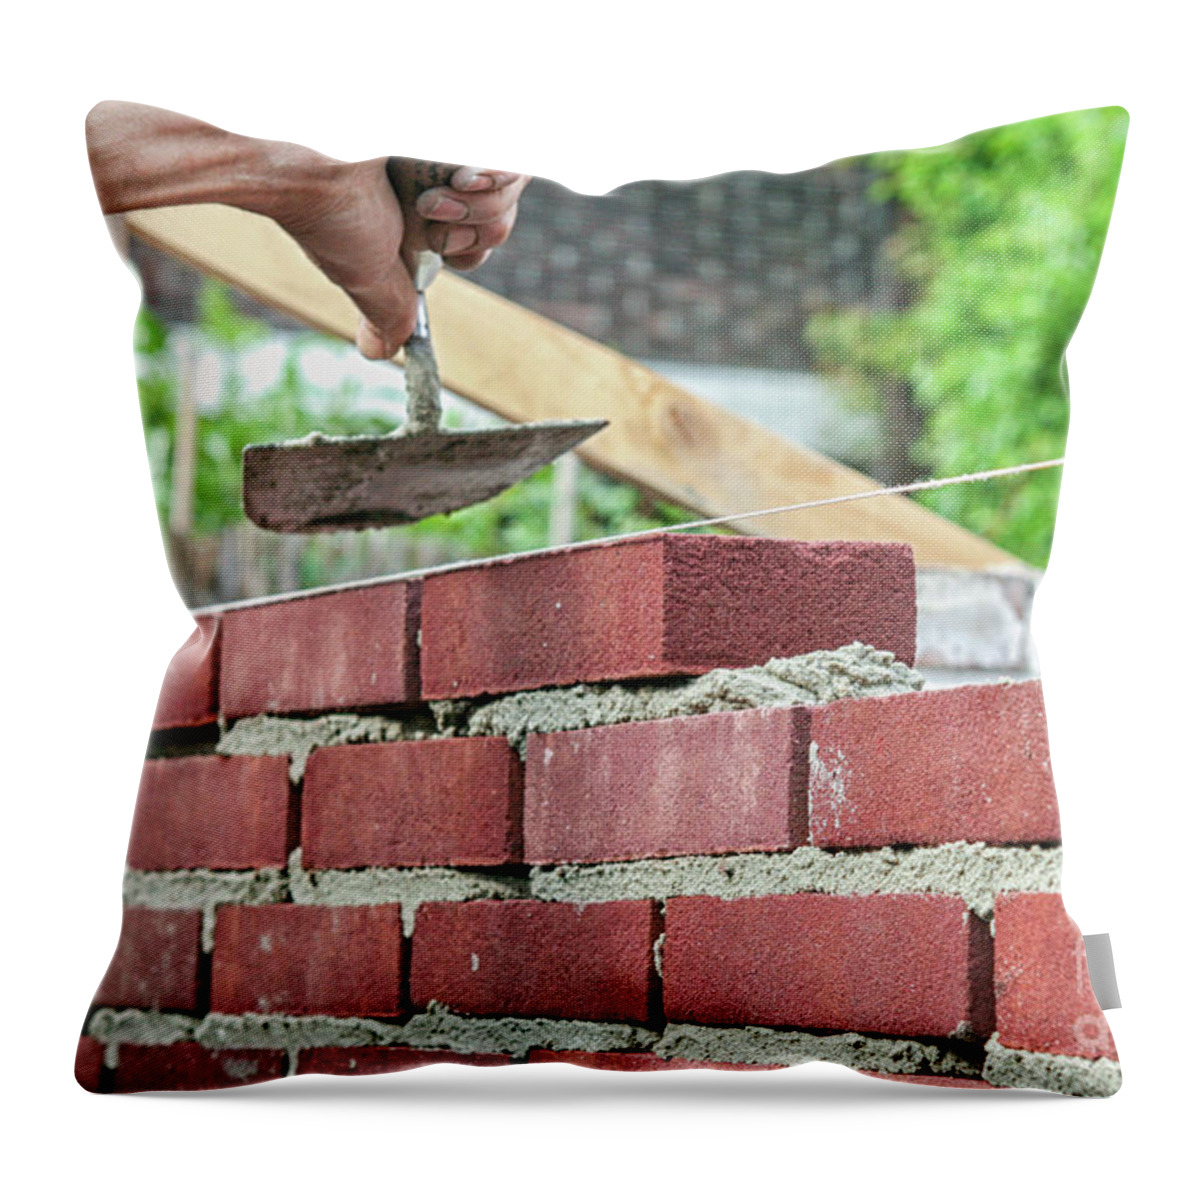 Trowel Pillows & Cushions for Sale